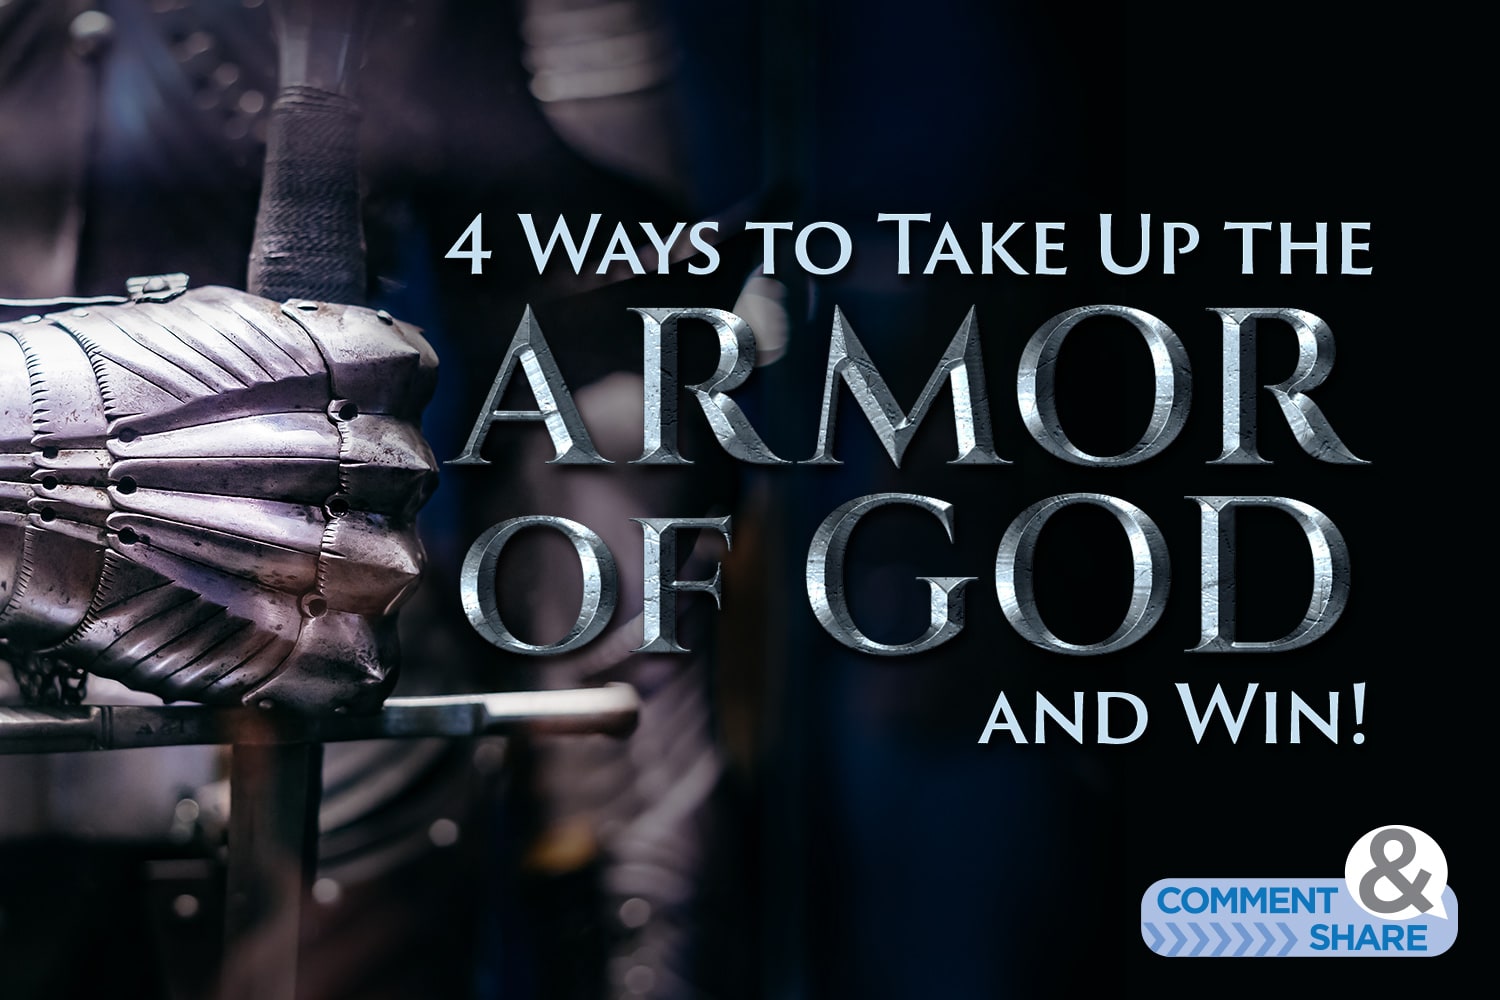 4 Ways to Take Up the Armor of God and Win